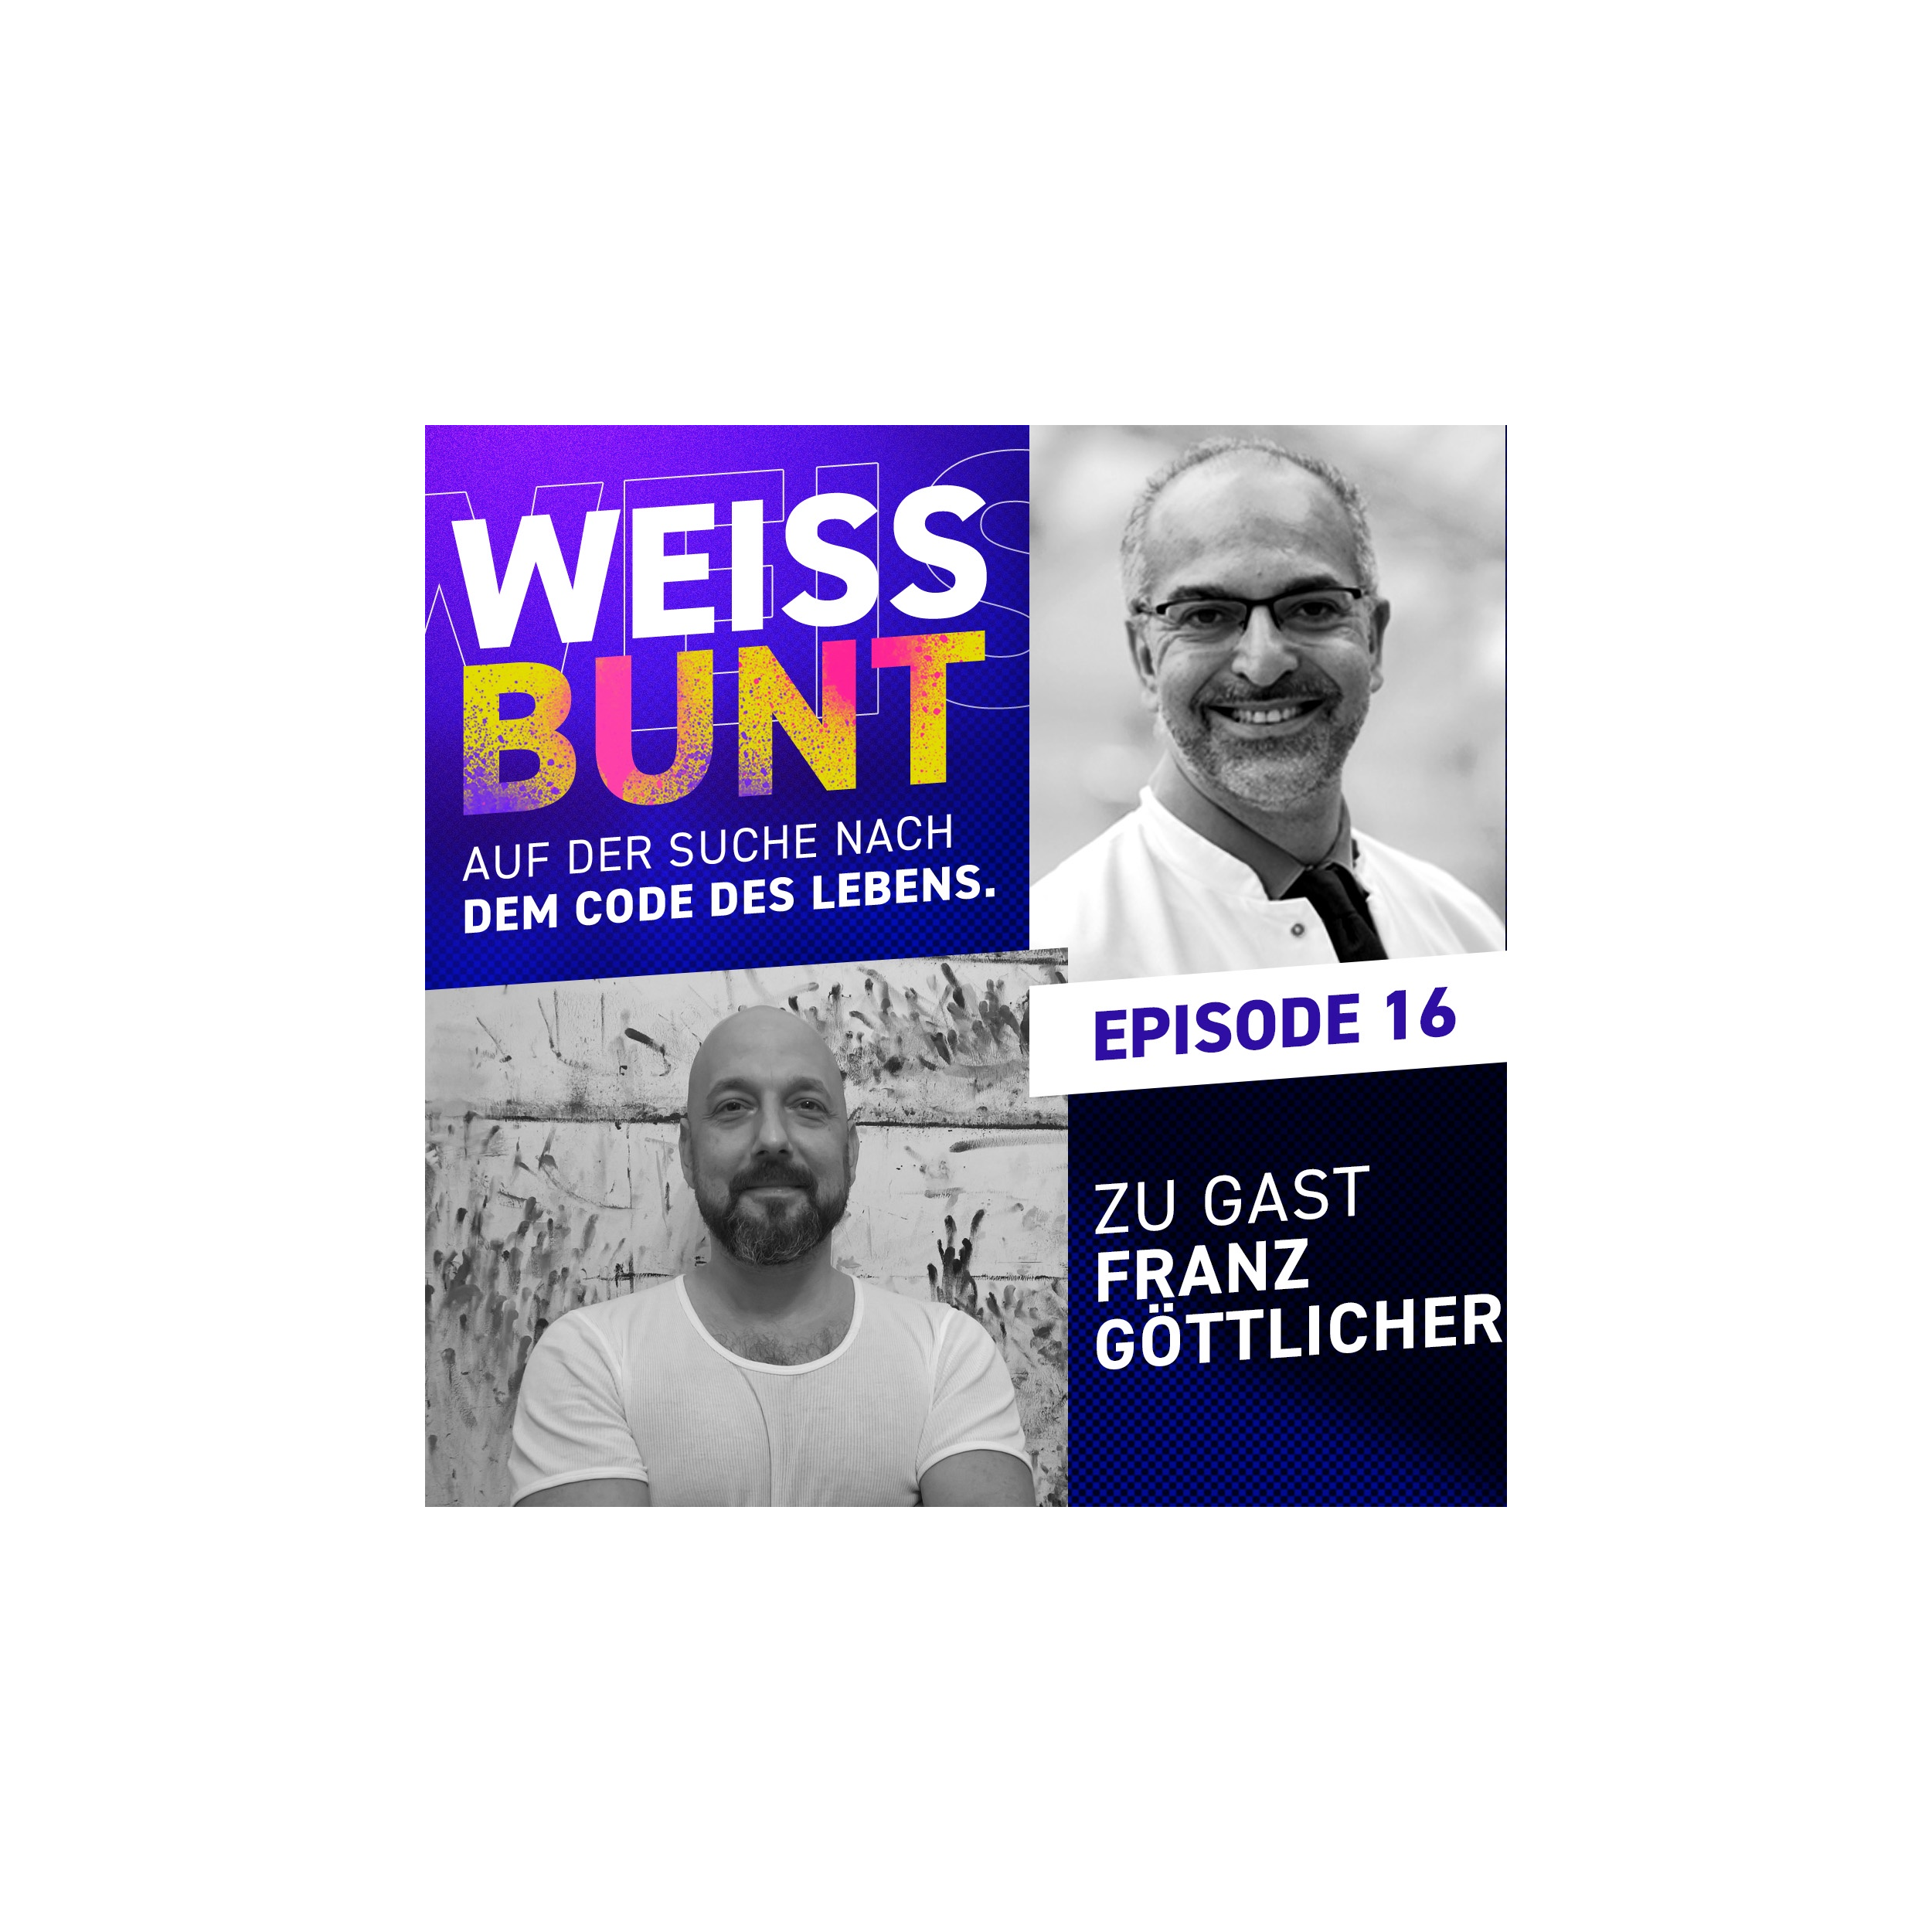 Weiss Bunt Podcast Episode 16 with the portrait of the two speakers.